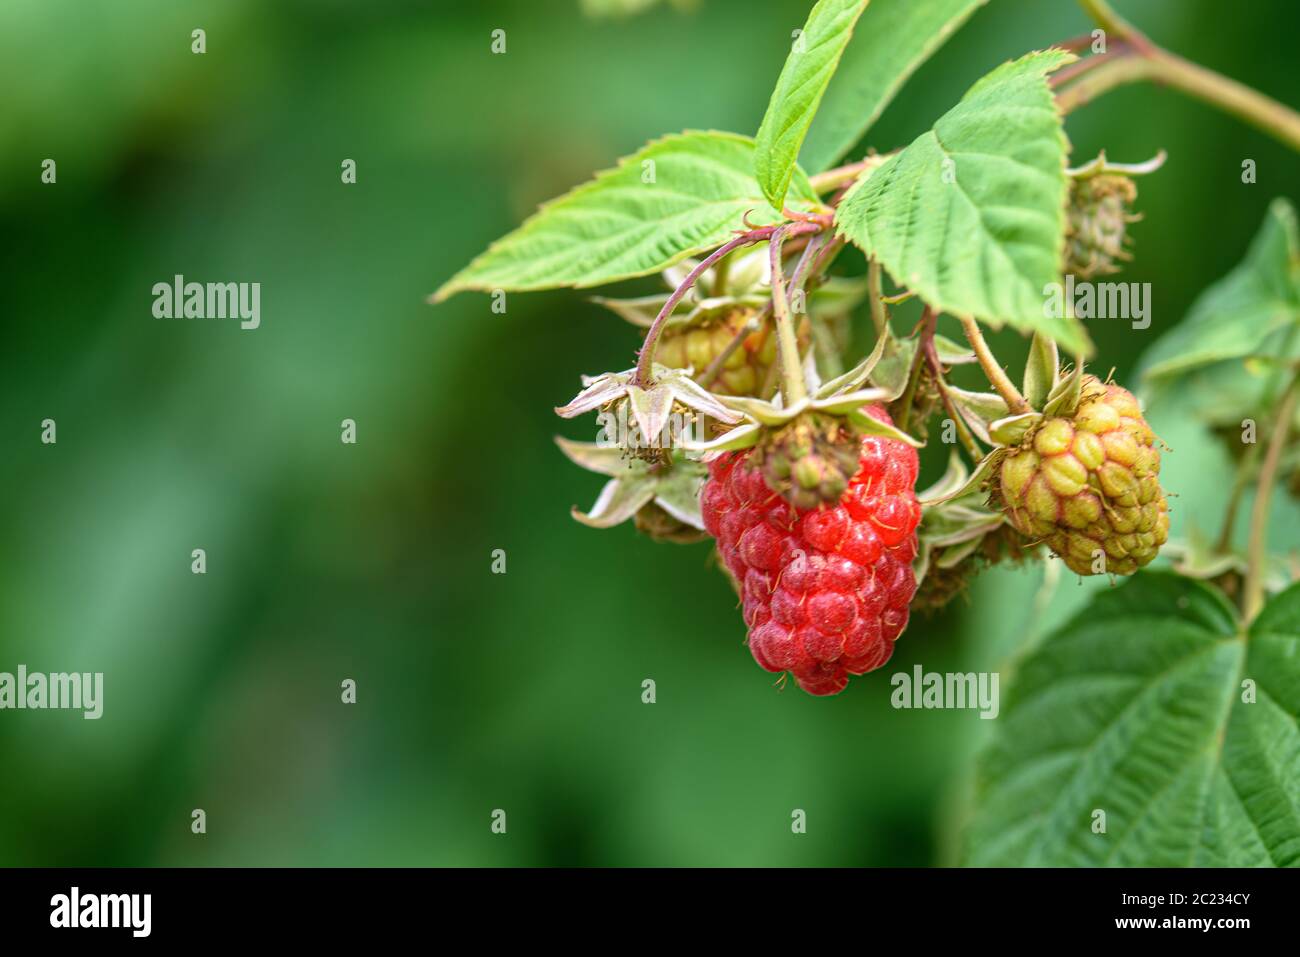 https://c8.alamy.com/comp/2C234CY/berries-of-ripe-and-immature-raspberries-on-a-branch-with-green-leaves-close-up-2C234CY.jpg